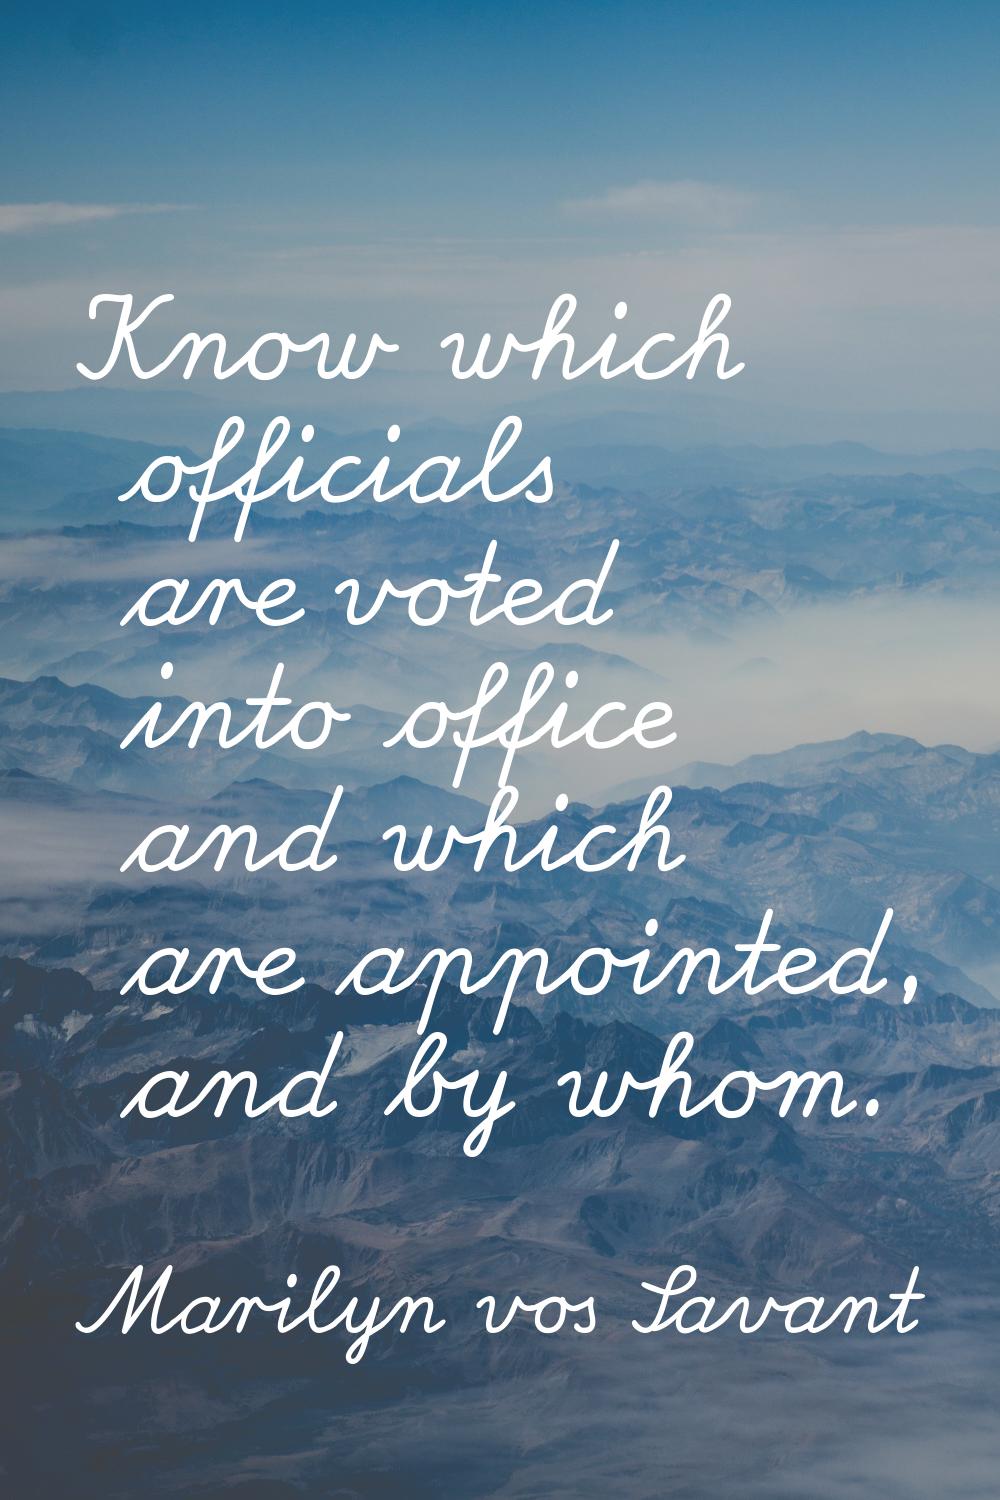 Know which officials are voted into office and which are appointed, and by whom.